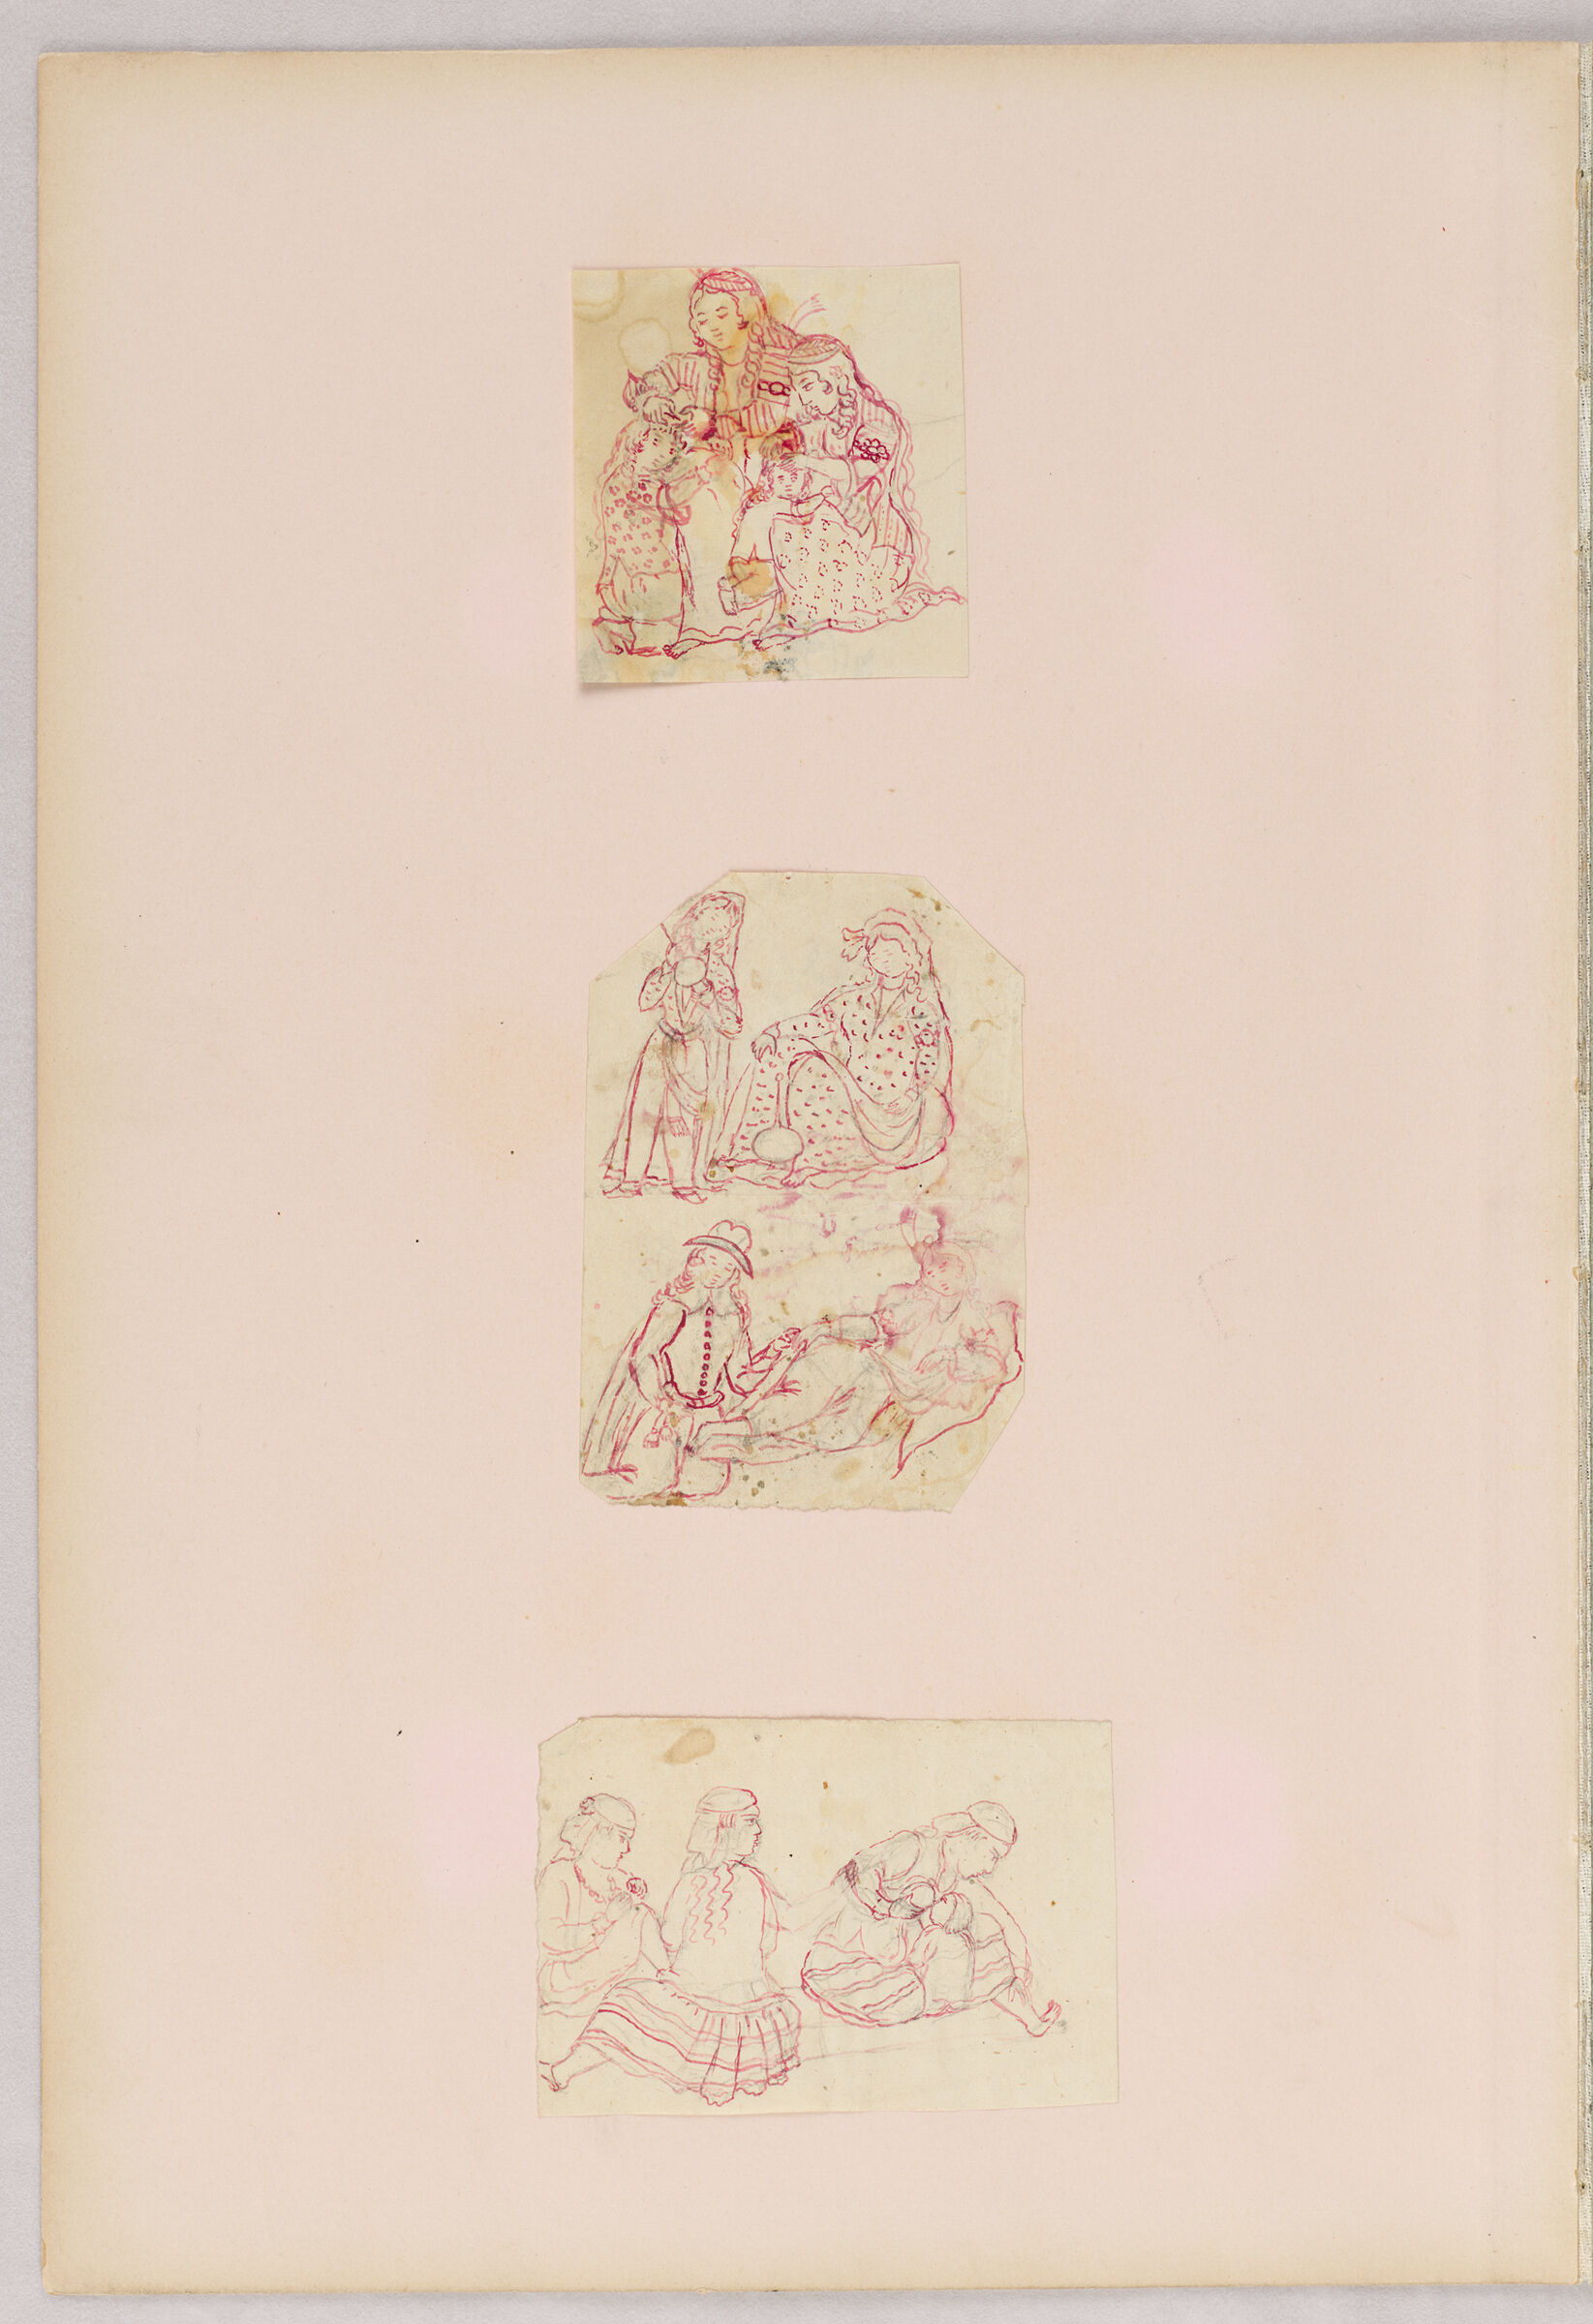 Folio 39 From An Album Of Drawings And Paintings: Three Sheets: Women Delousing Children; Women With European Man; Women With Nursing Child (Recto); Fingernail Drawing: Child In Classical Garb (Verso)